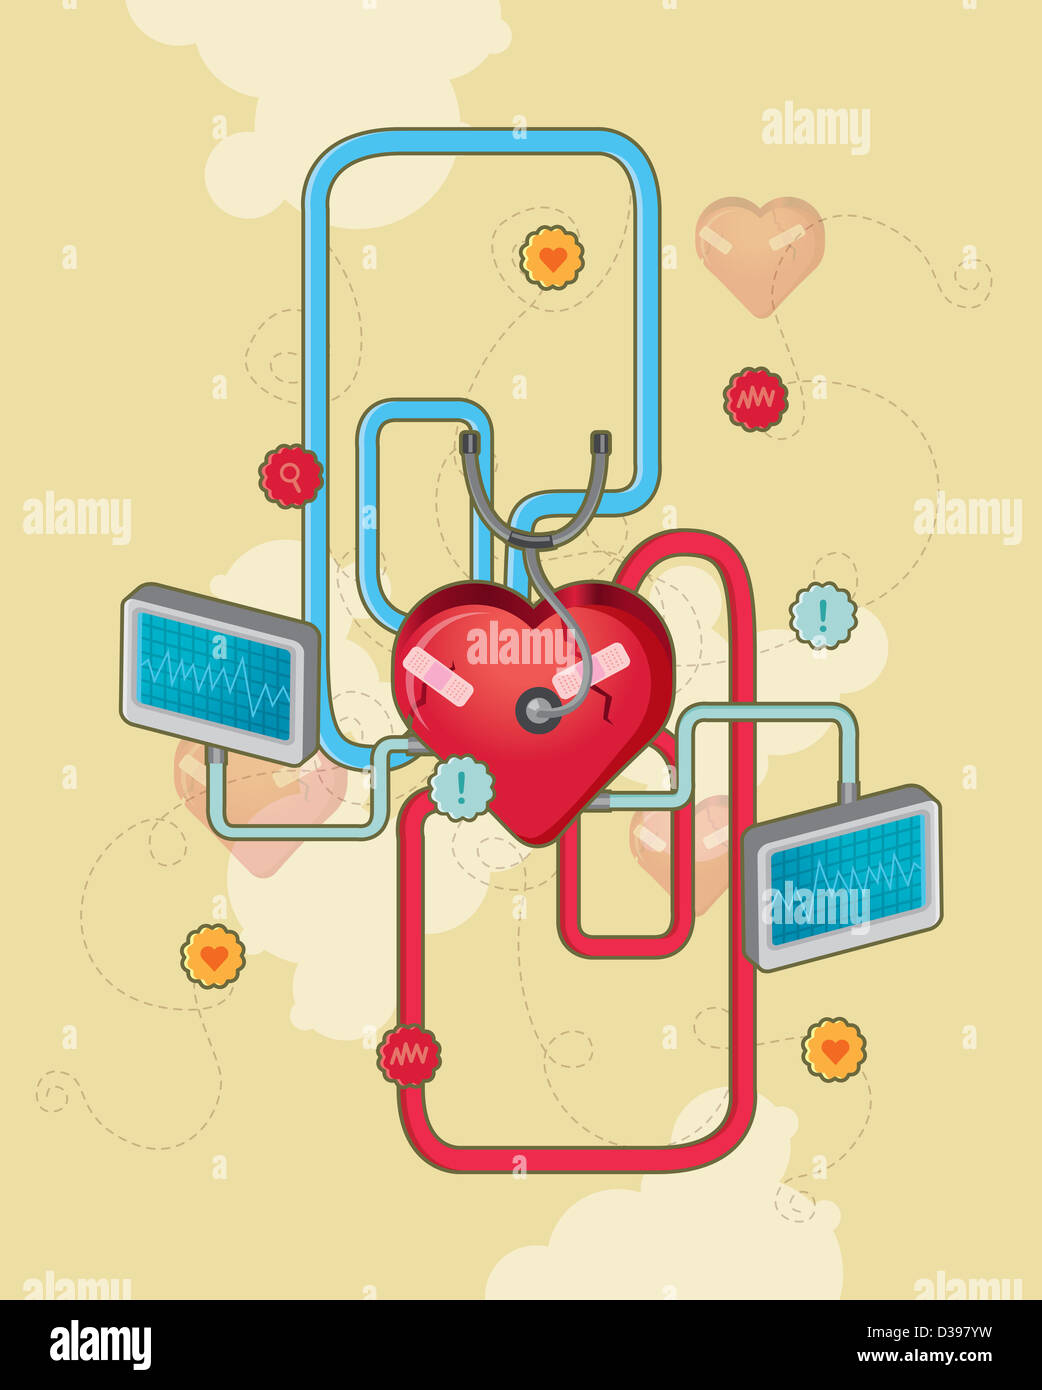 Heart connected with pulse trace screen depicting cardiology Stock Photo